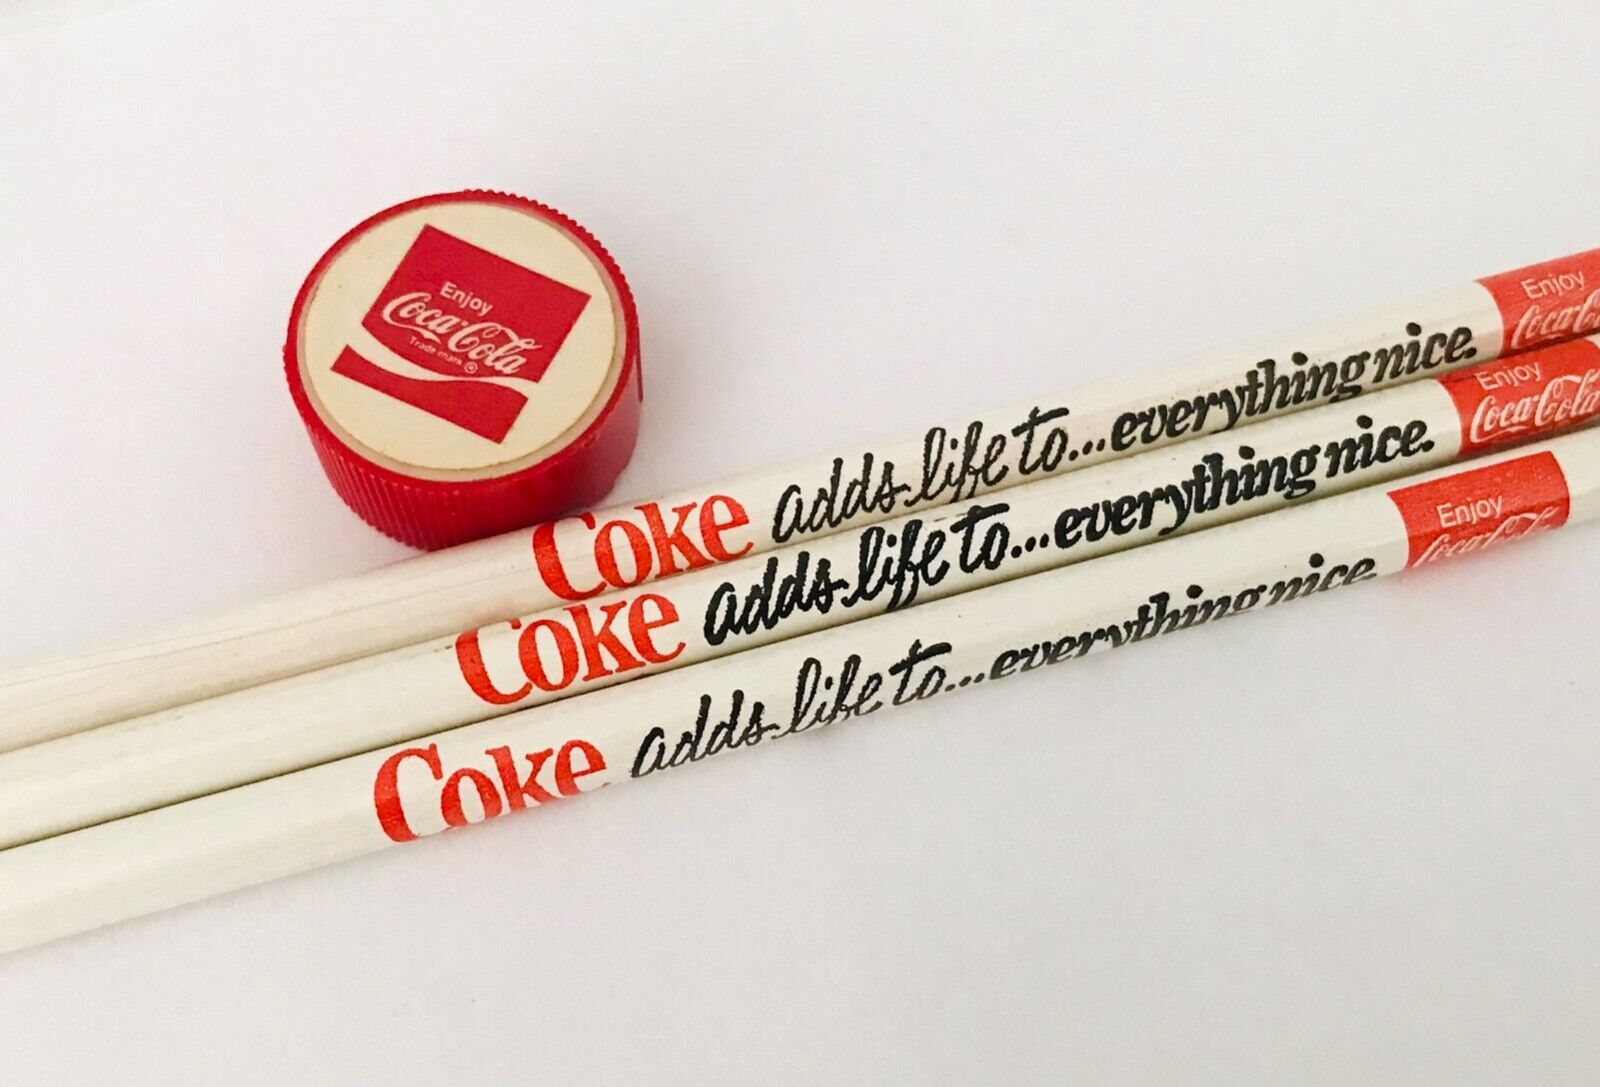 Set of 3 Coke Adds Life to Everything Nice Pencils & 1 Pencil Sharpener Vintage